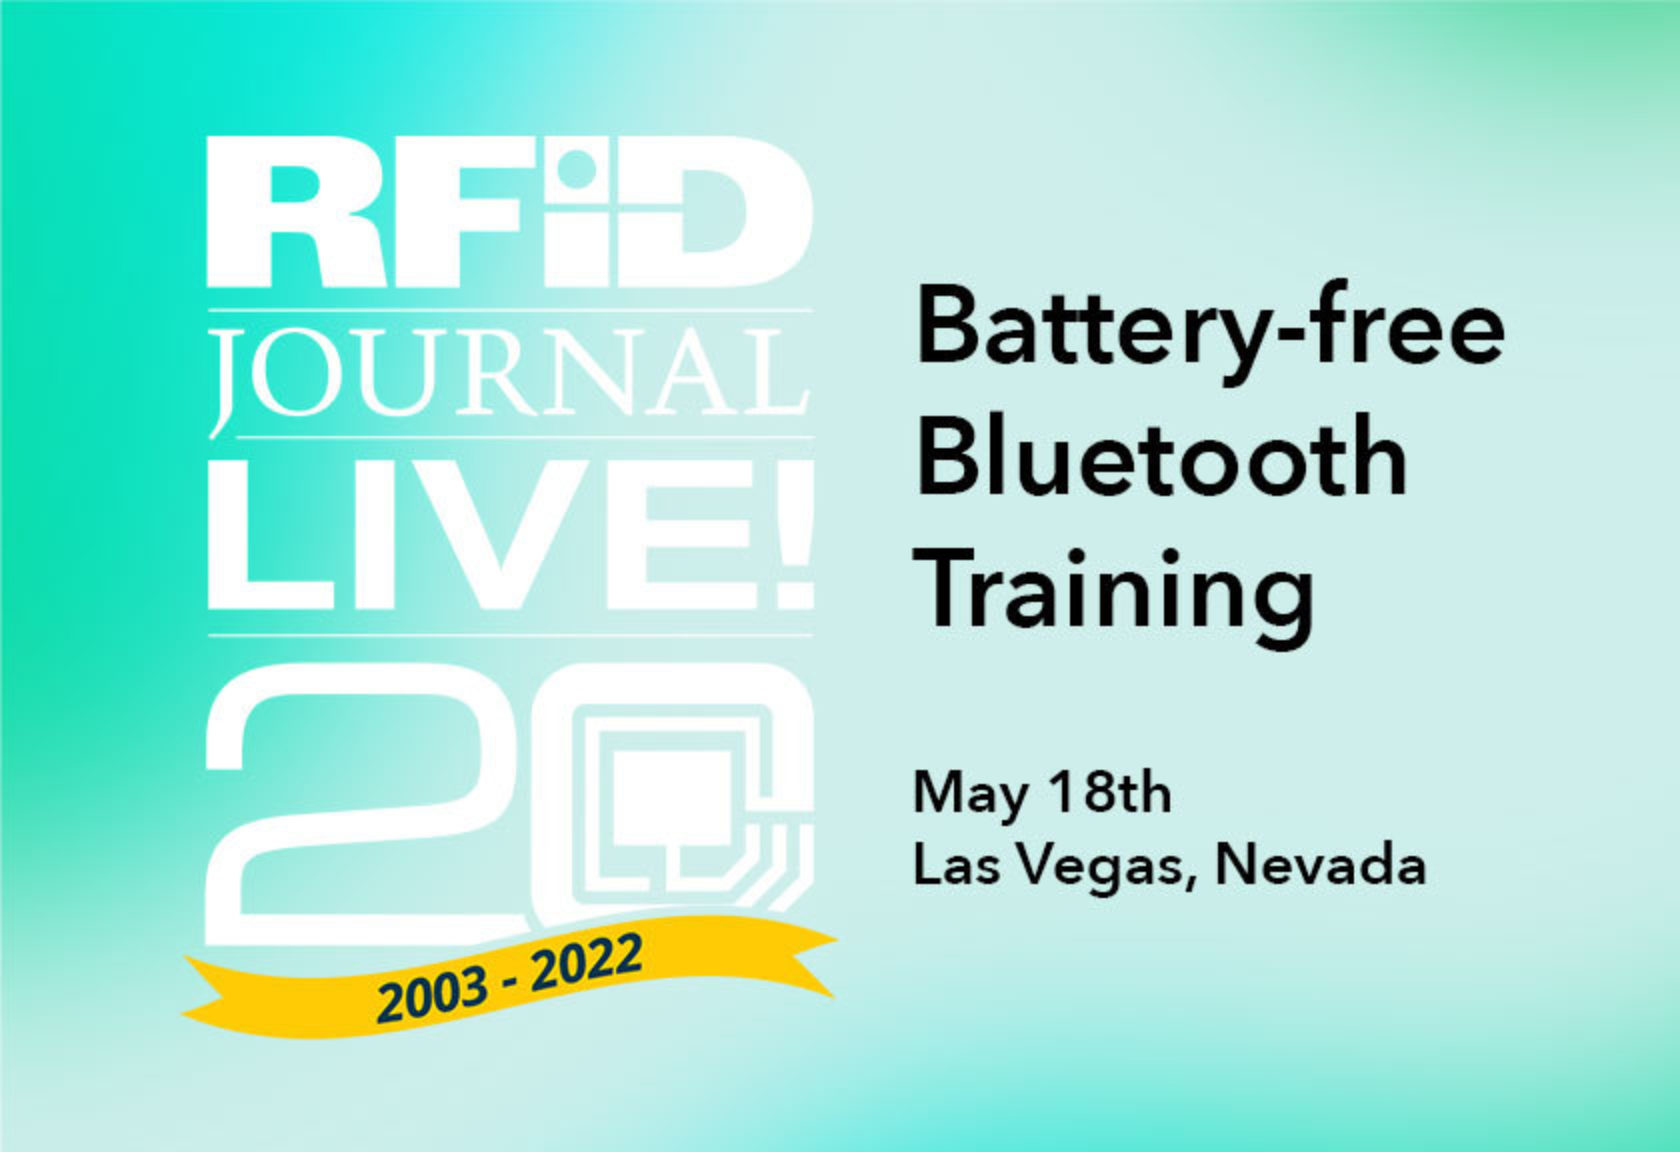 Join Wiliot for the first Battery-free Bluetooth Training at RFID Journal LIVE!